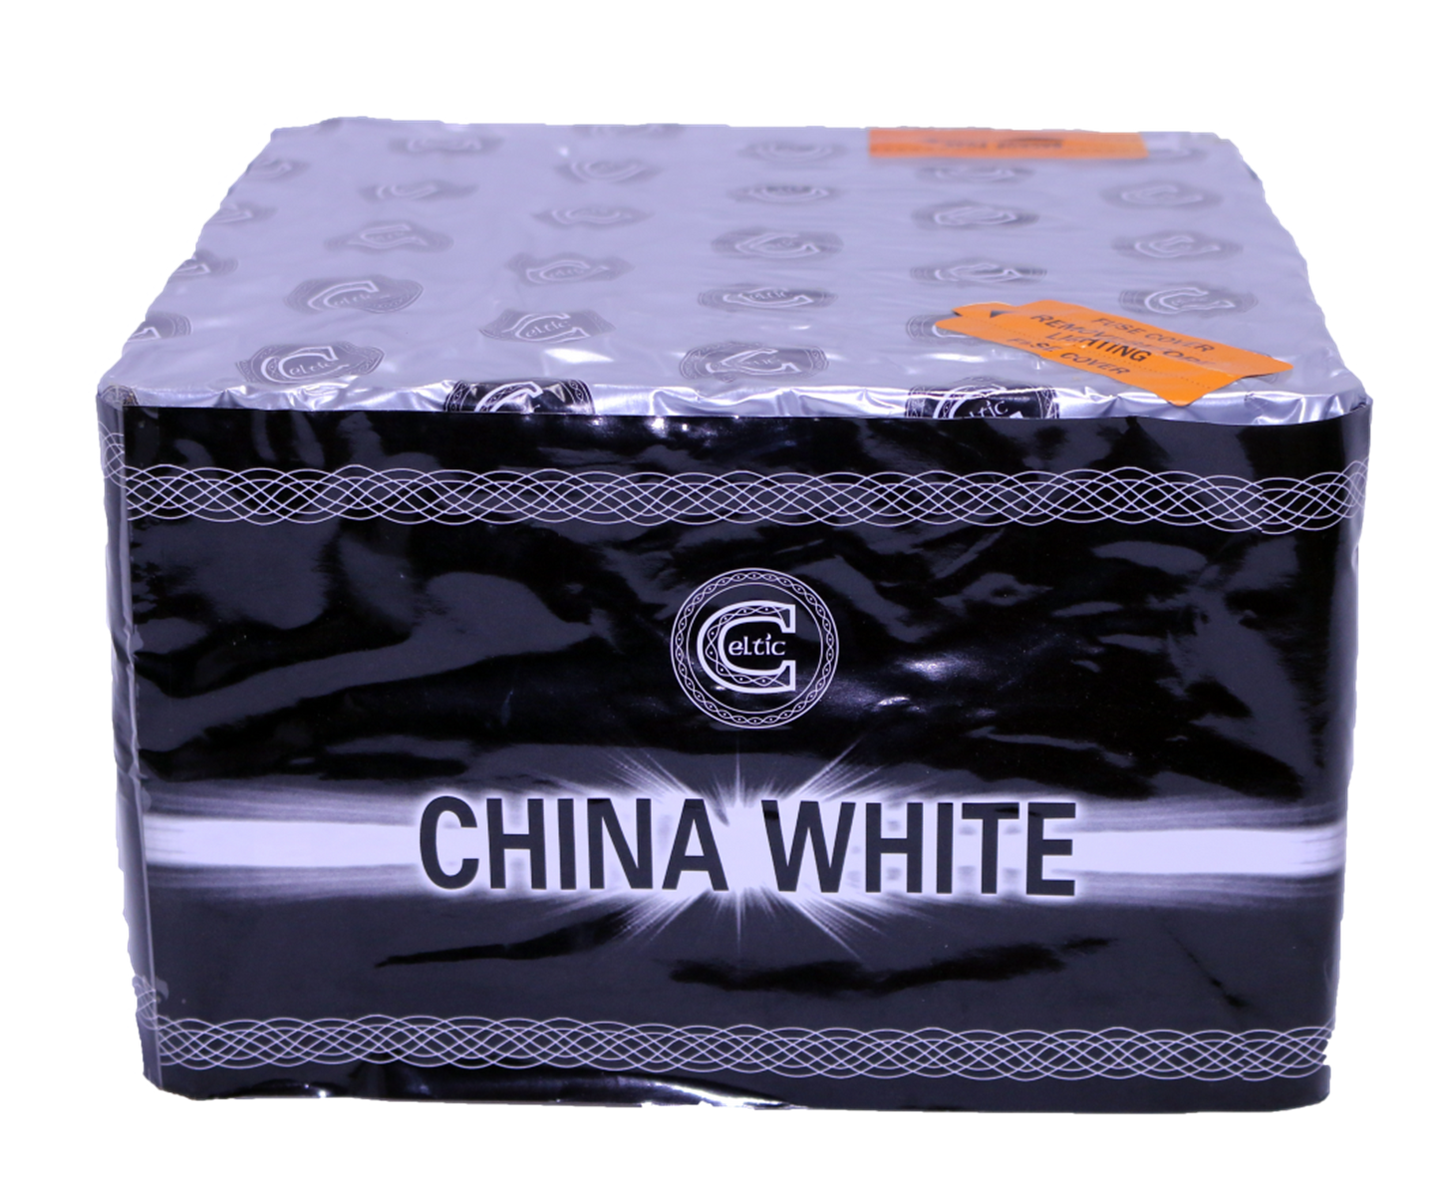 China White by Celtic Fireworks